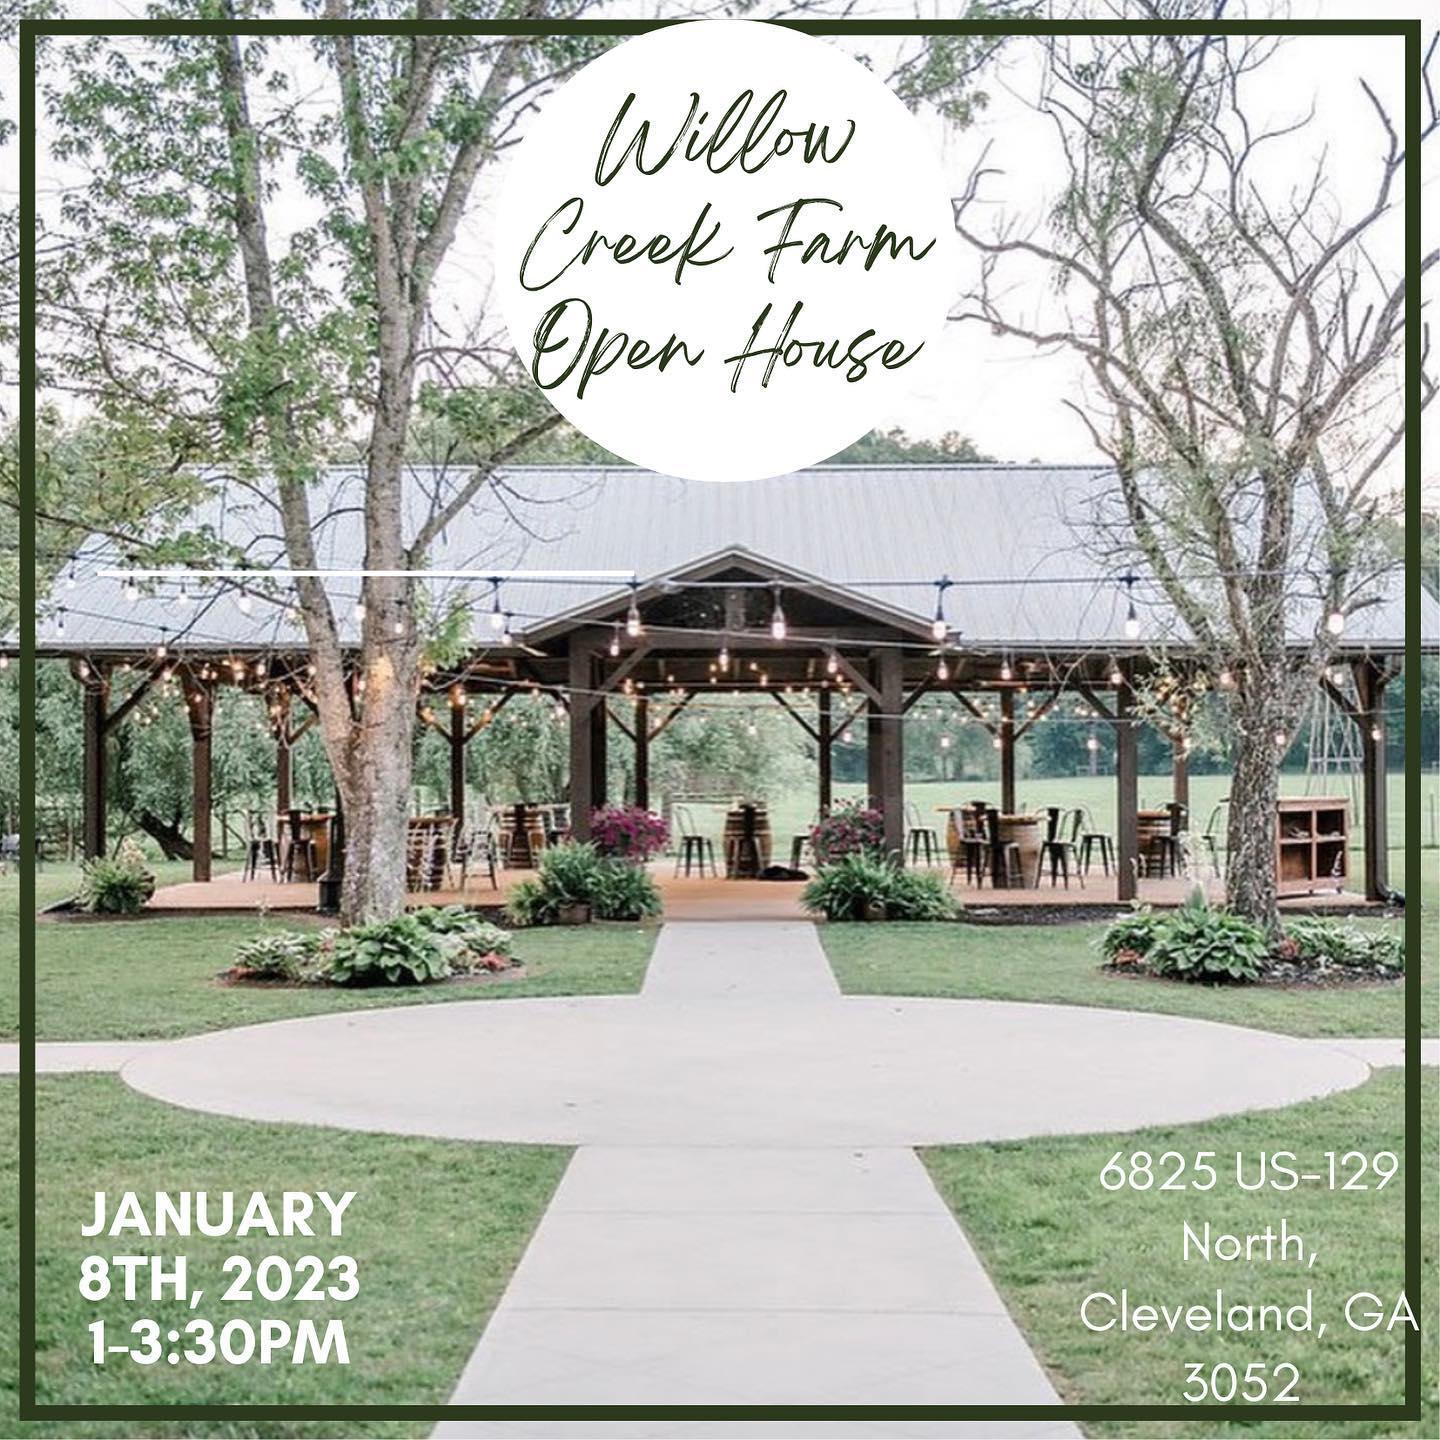 Image for post: Willow Creek Farm Open House - January 2023